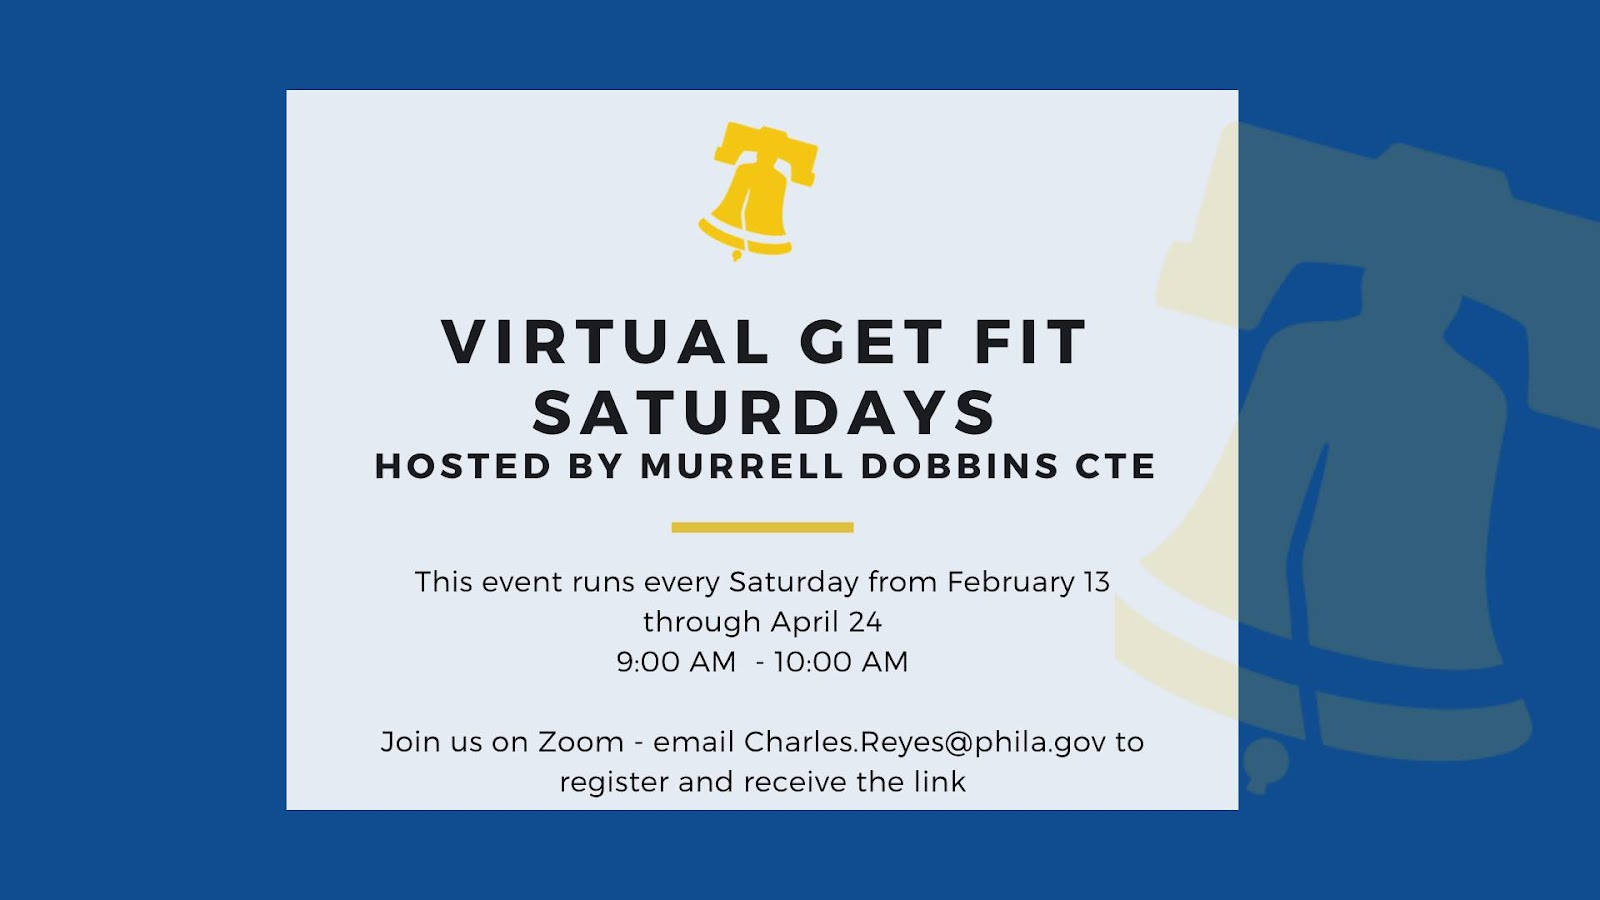 May be an image of text that says 'VIRTUAL GET FIT SATURDAYS HOSTED BY MURRELL DOBBINS cTE This event runs every Saturday from February 13 through April 24 9:00 AM -10:00 AM Join us on Zoom email Charles.Reyes@phila.gov to register and receive the link'